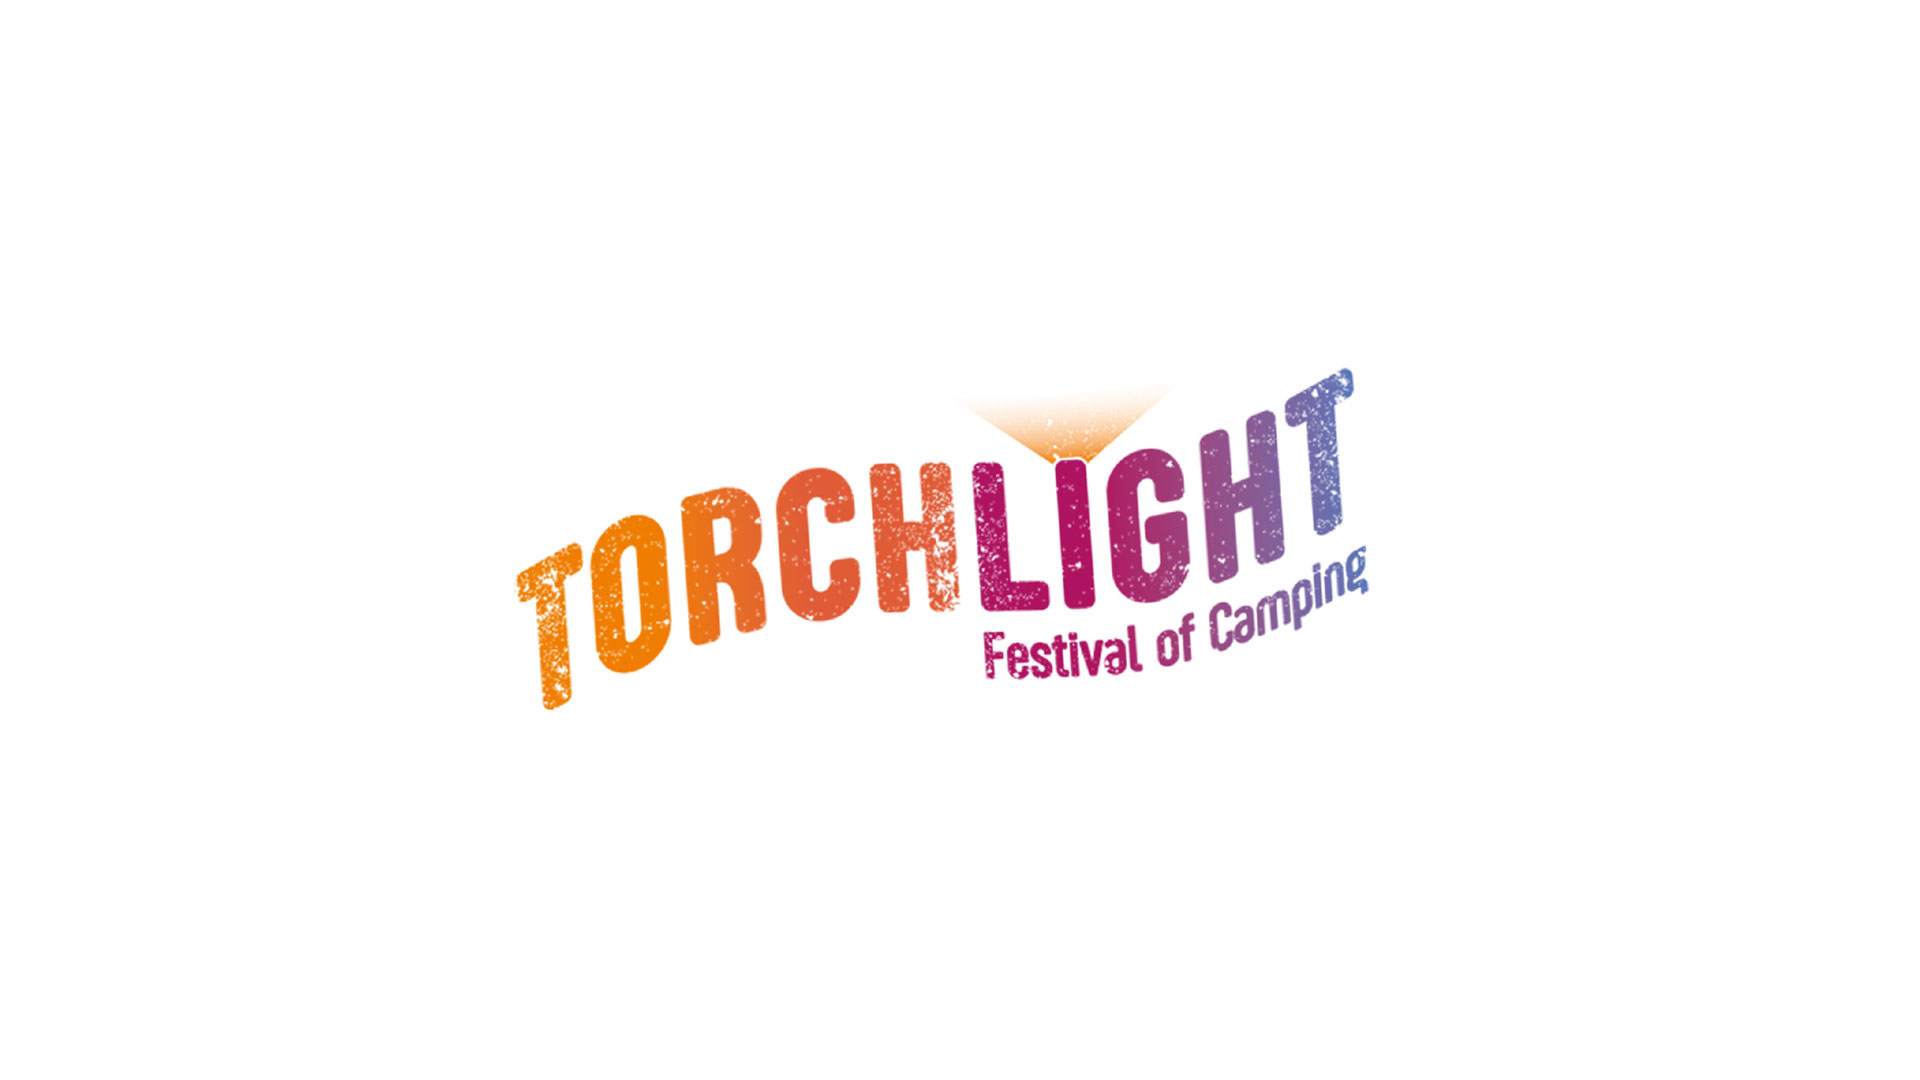 Torchlight Festival of Camping